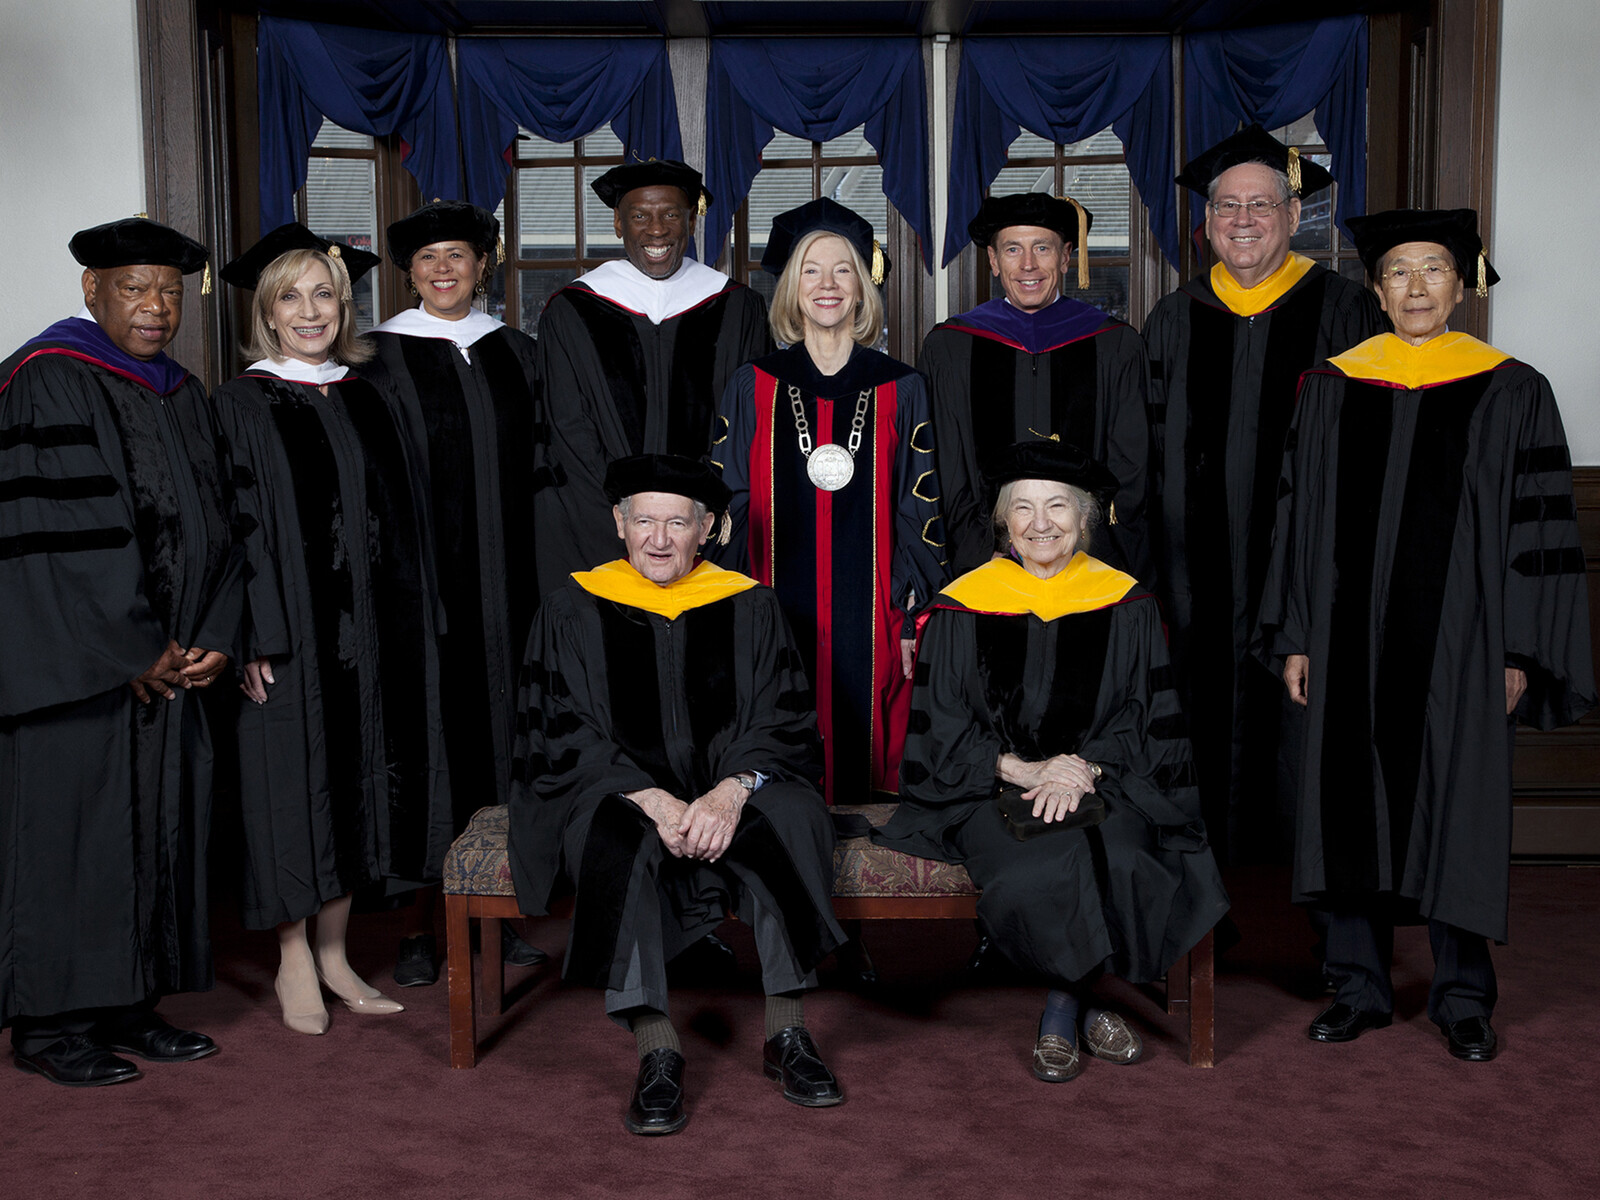 Amy Gutmann and 2012 Penn honorary degree recipients in regalia